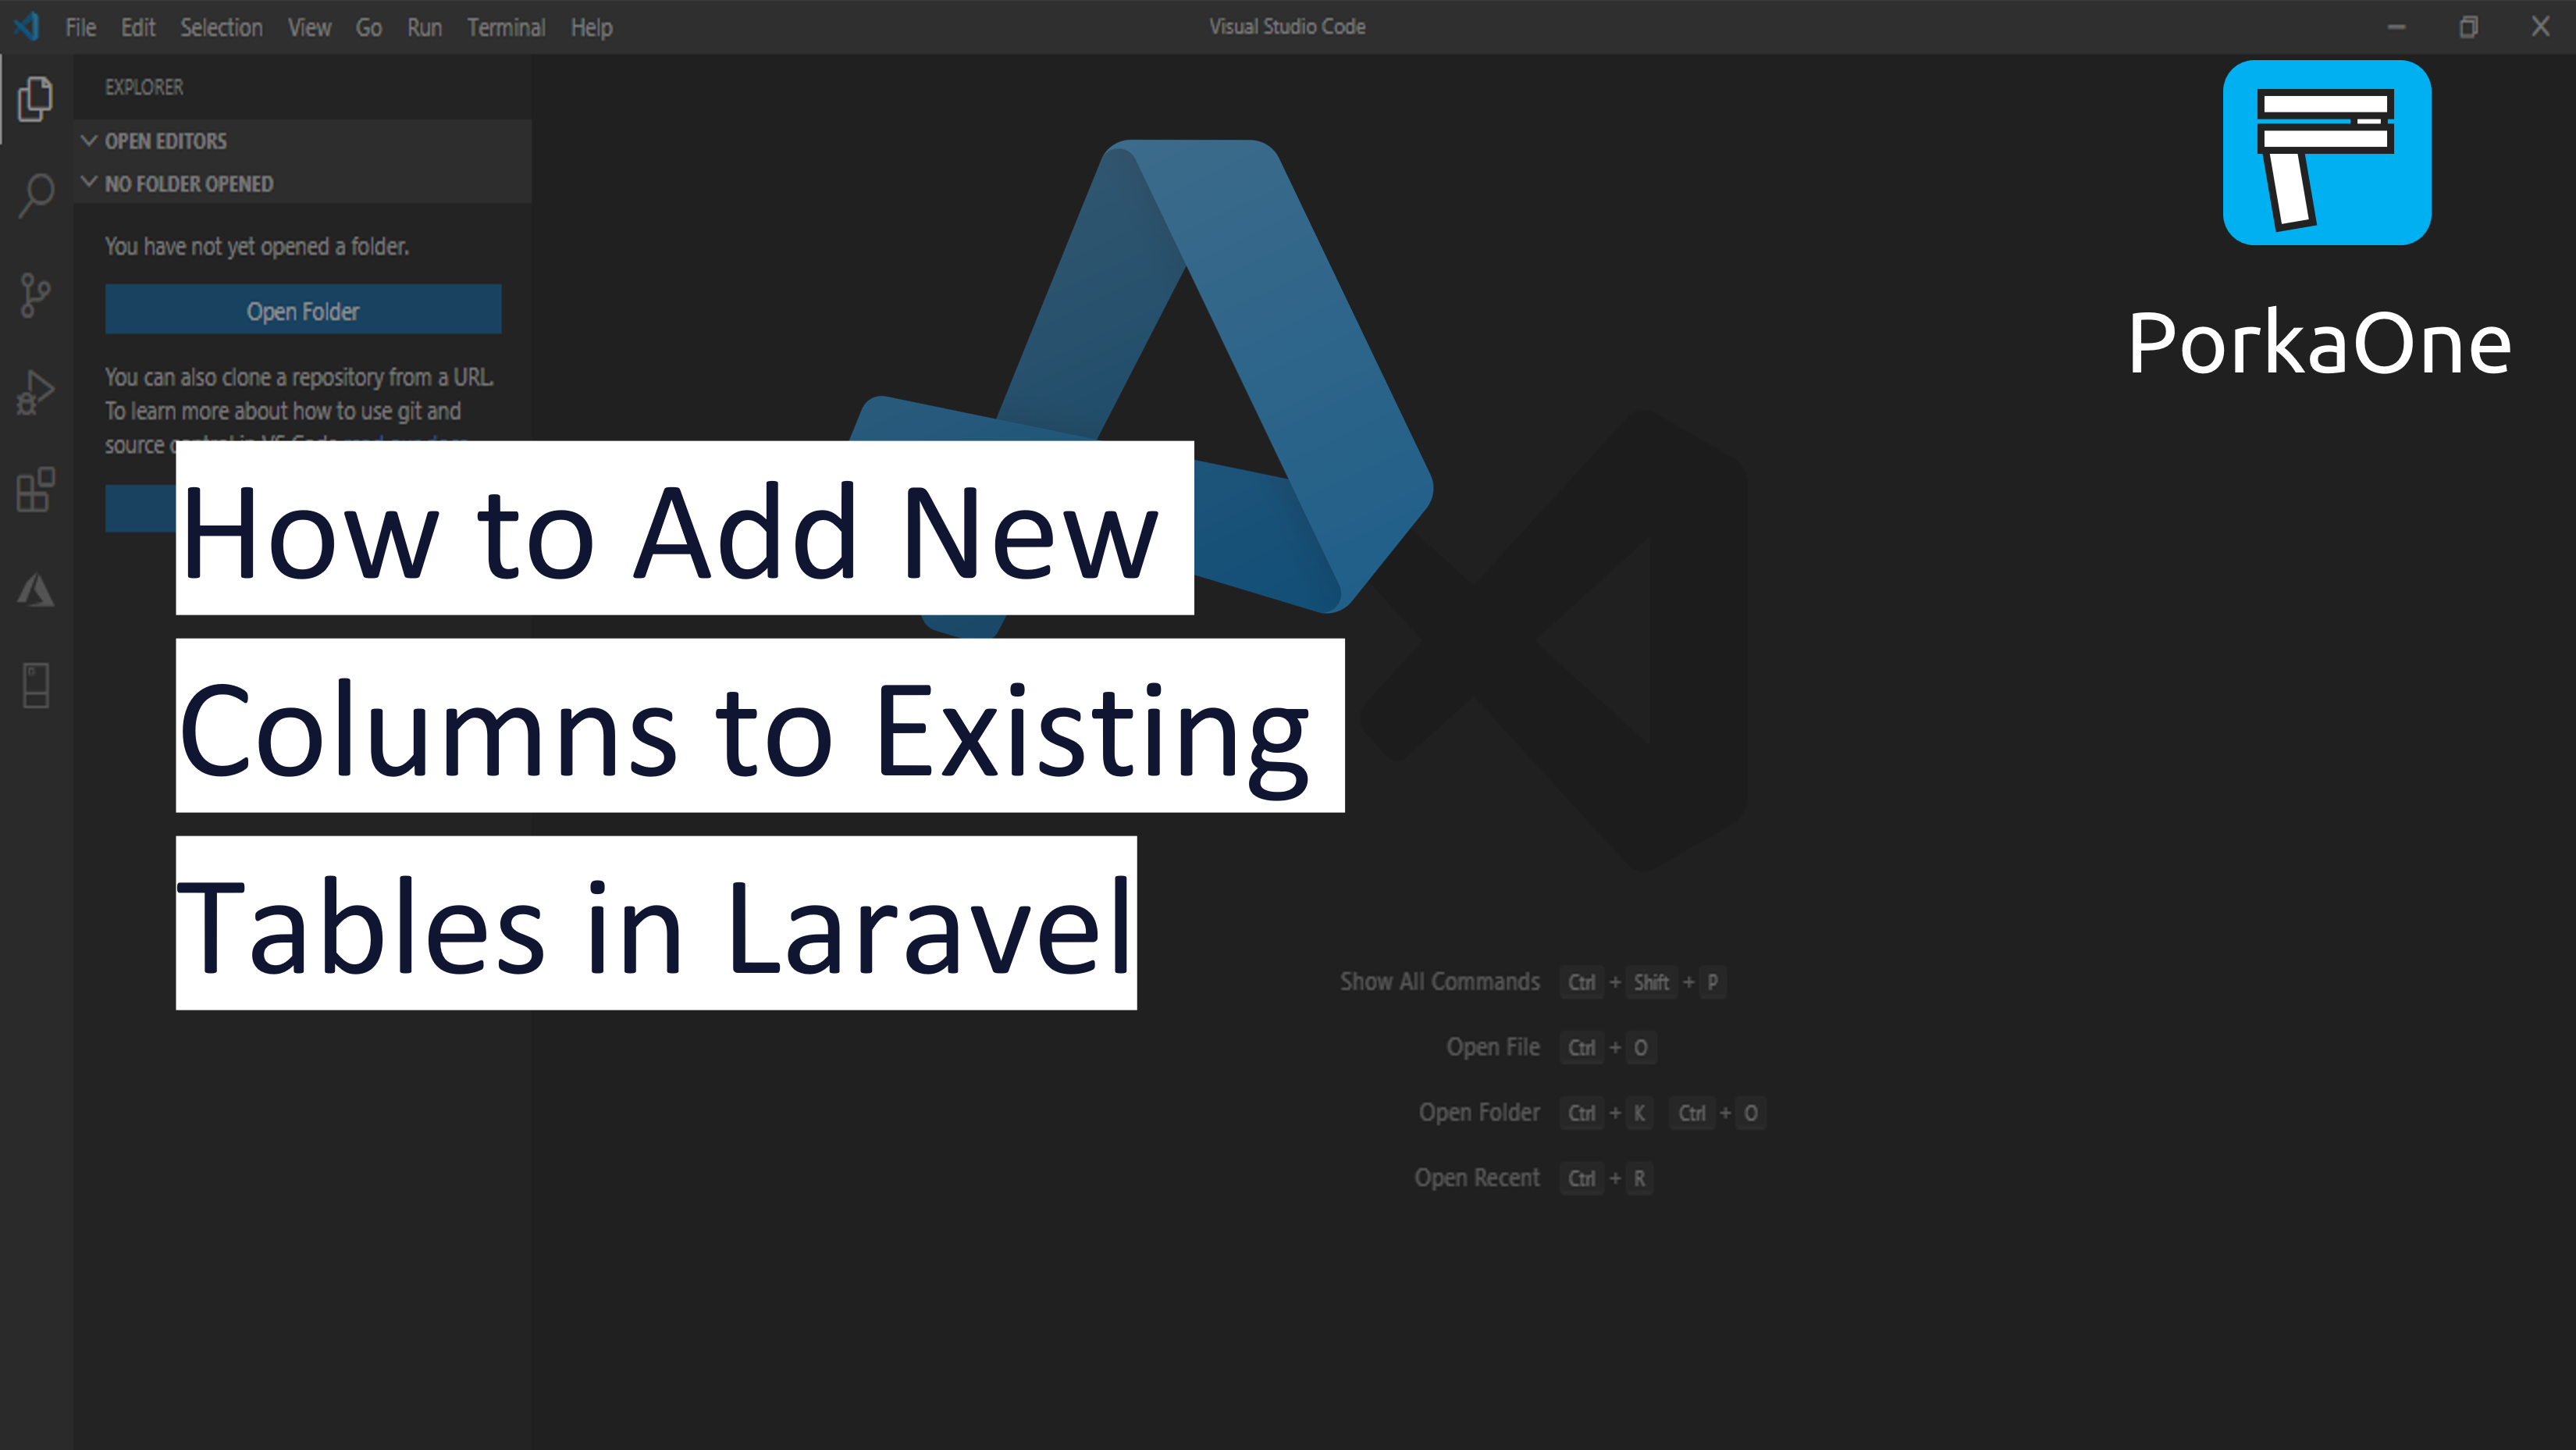 How to Add New Columns to Existing Tables in Laravel